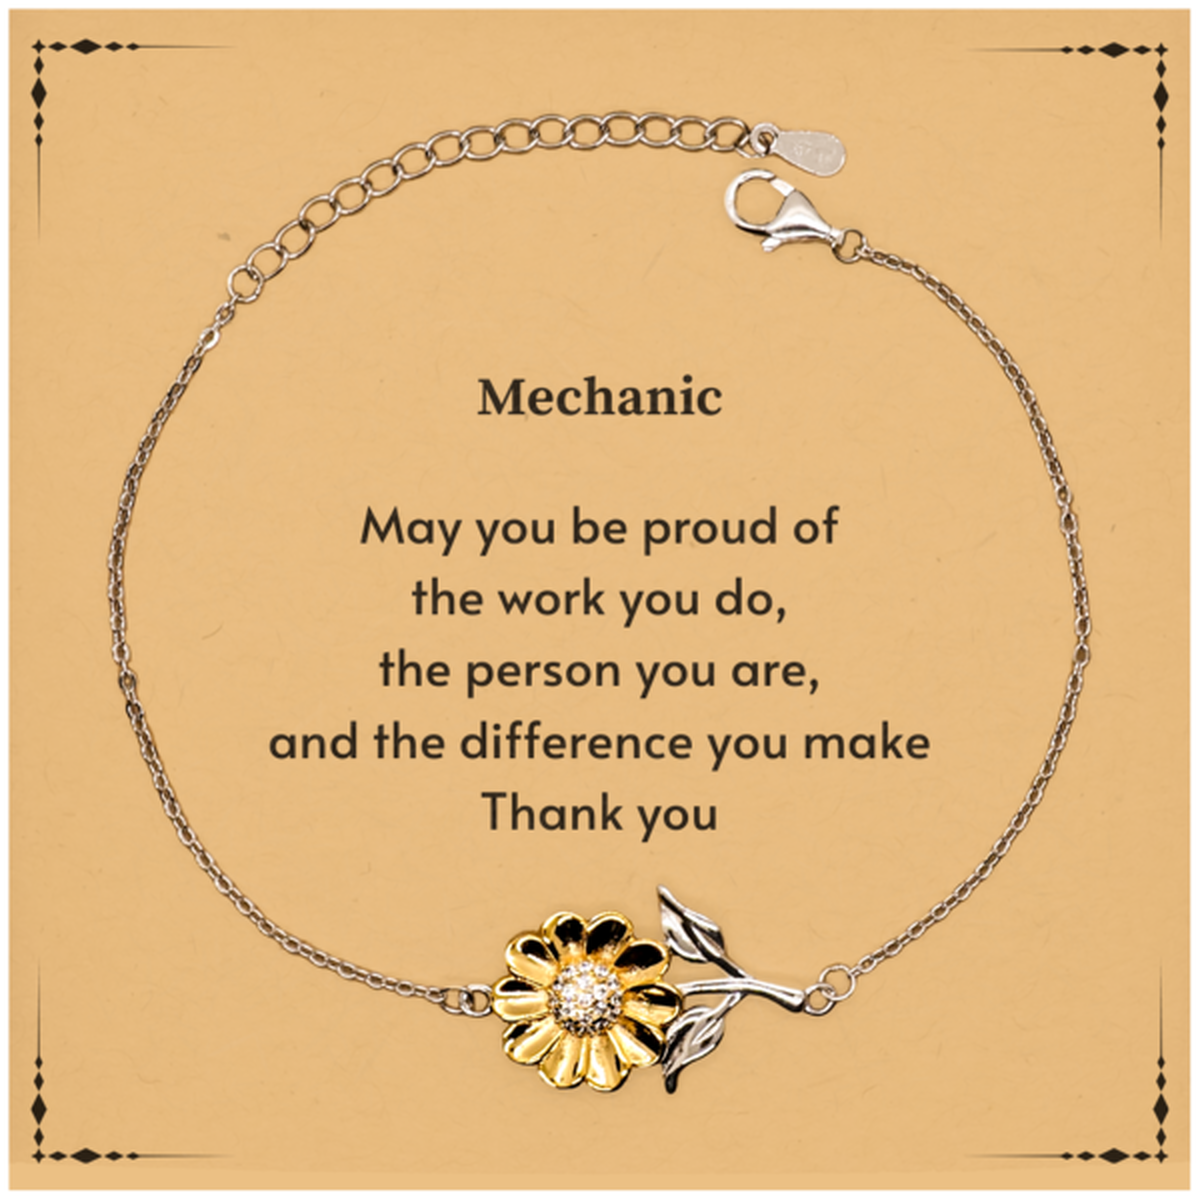 Heartwarming Sunflower Bracelet Retirement Coworkers Gifts for Mechanic, Mechanic May You be proud of the work you do, the person you are Gifts for Boss Men Women Friends